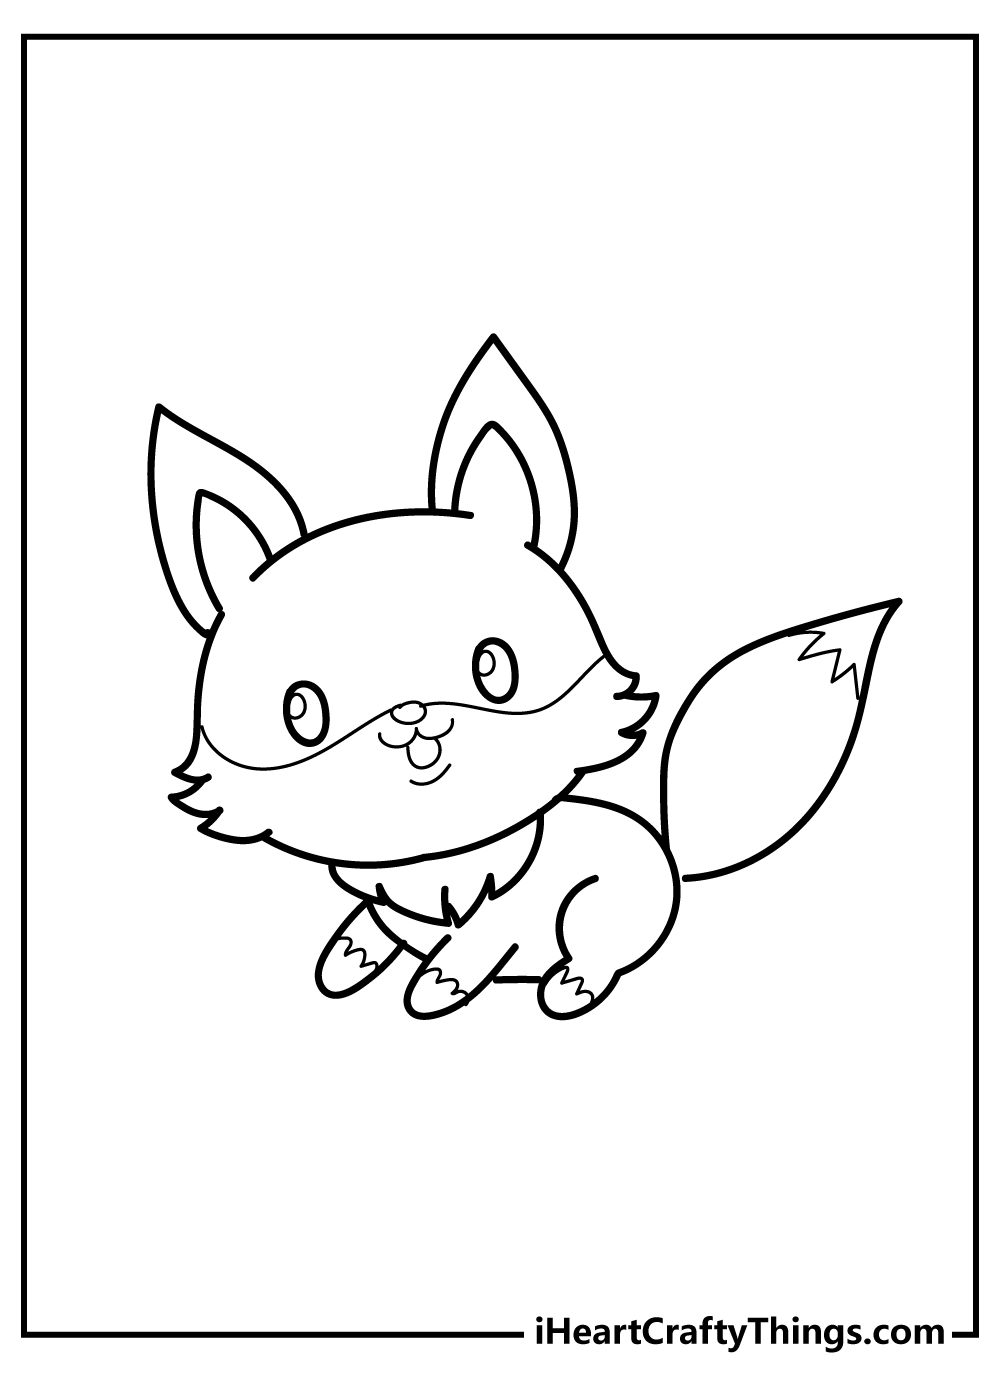 Cute Animals Coloring Pages Updated 20